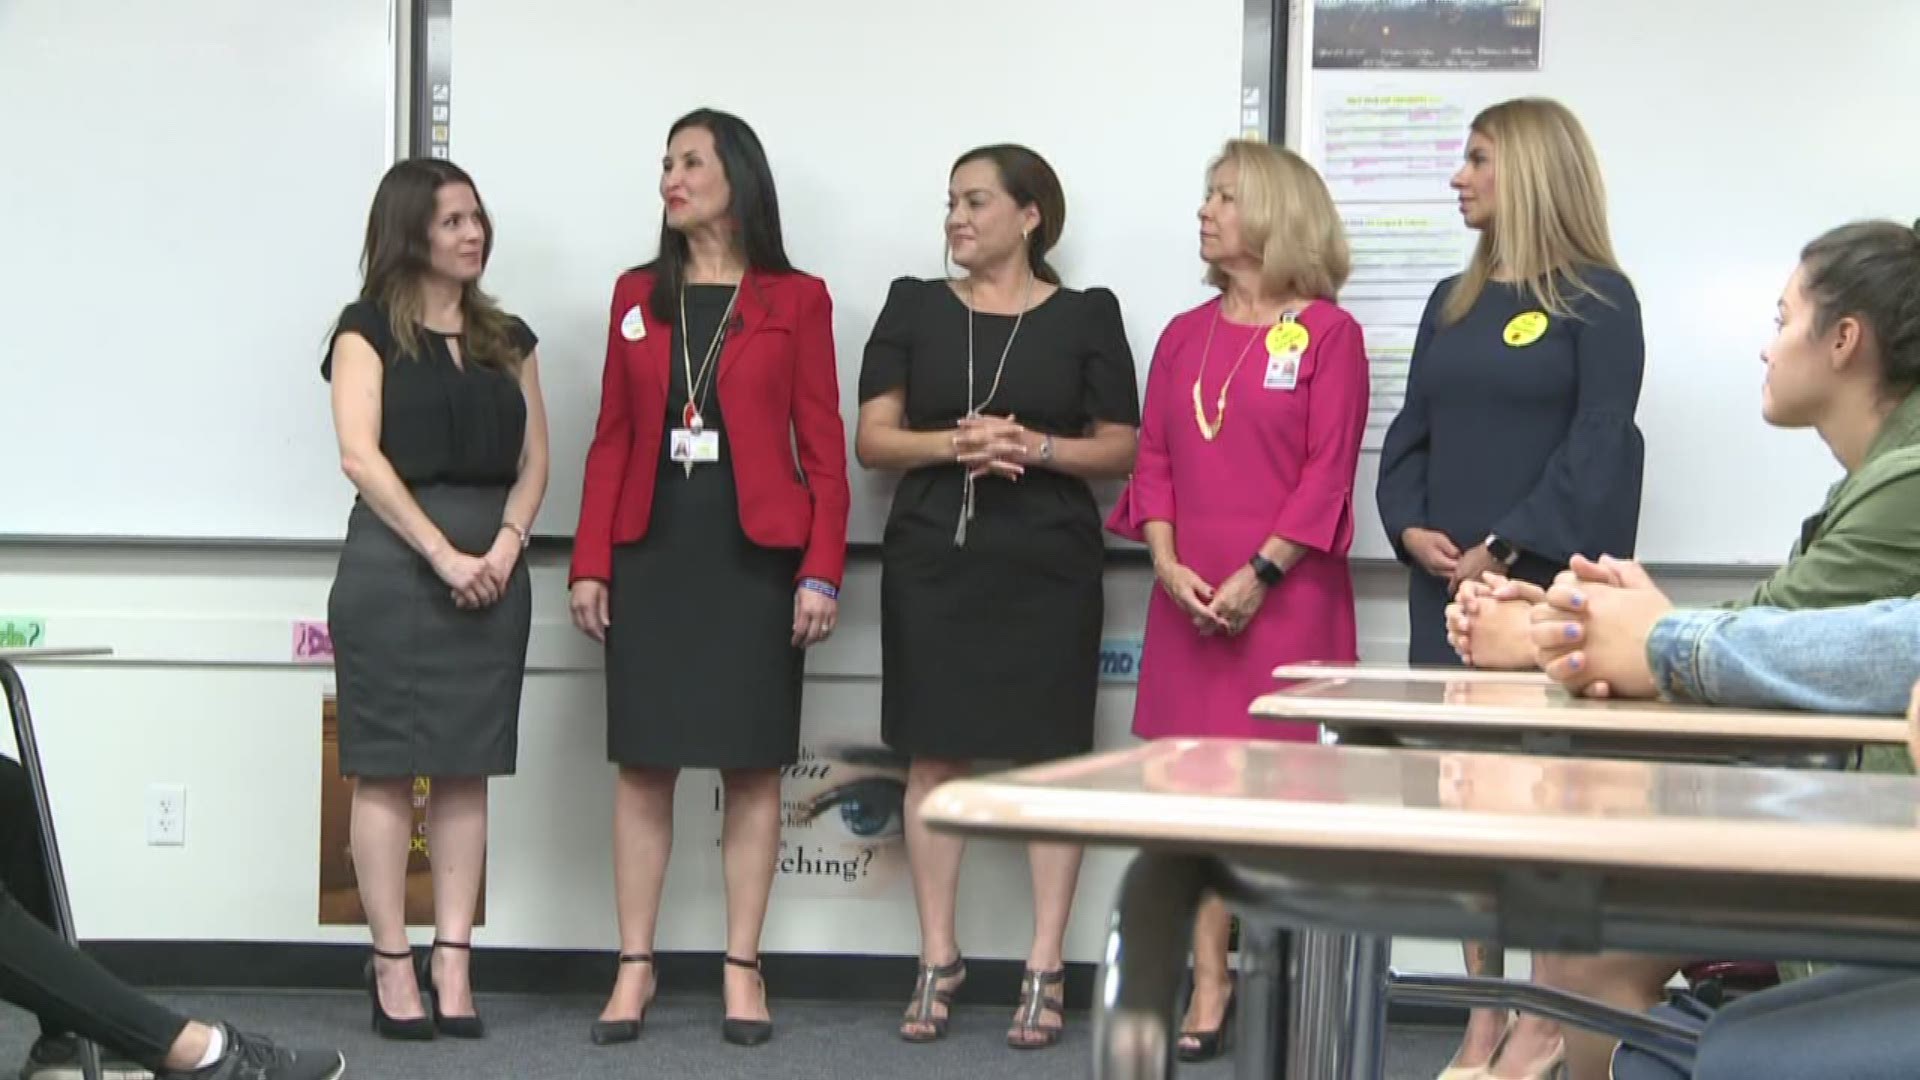 For the first time in history, Tolleson's mayor, superintendents, and school board presidents are all women.